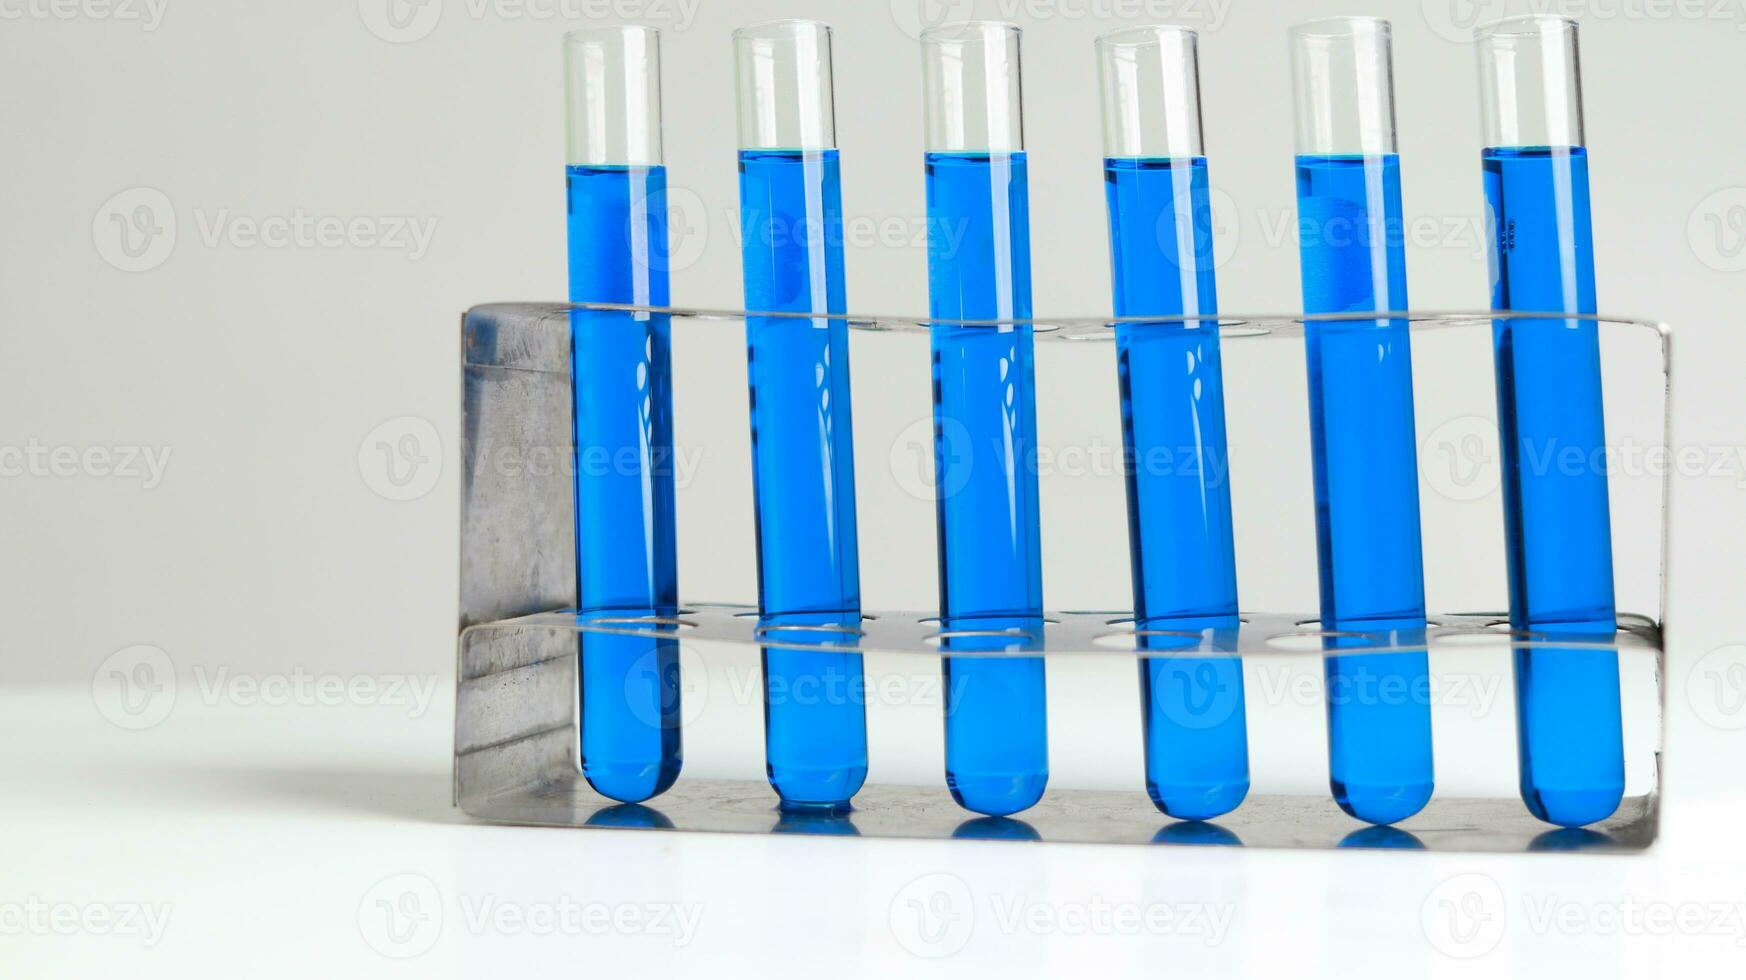 science experiment equipment and microscopes for chemistry, biology, microbiology, bacteriology, virology laboratories for scientists, researchers, medical education or pharmacology.medical, clinic. photo